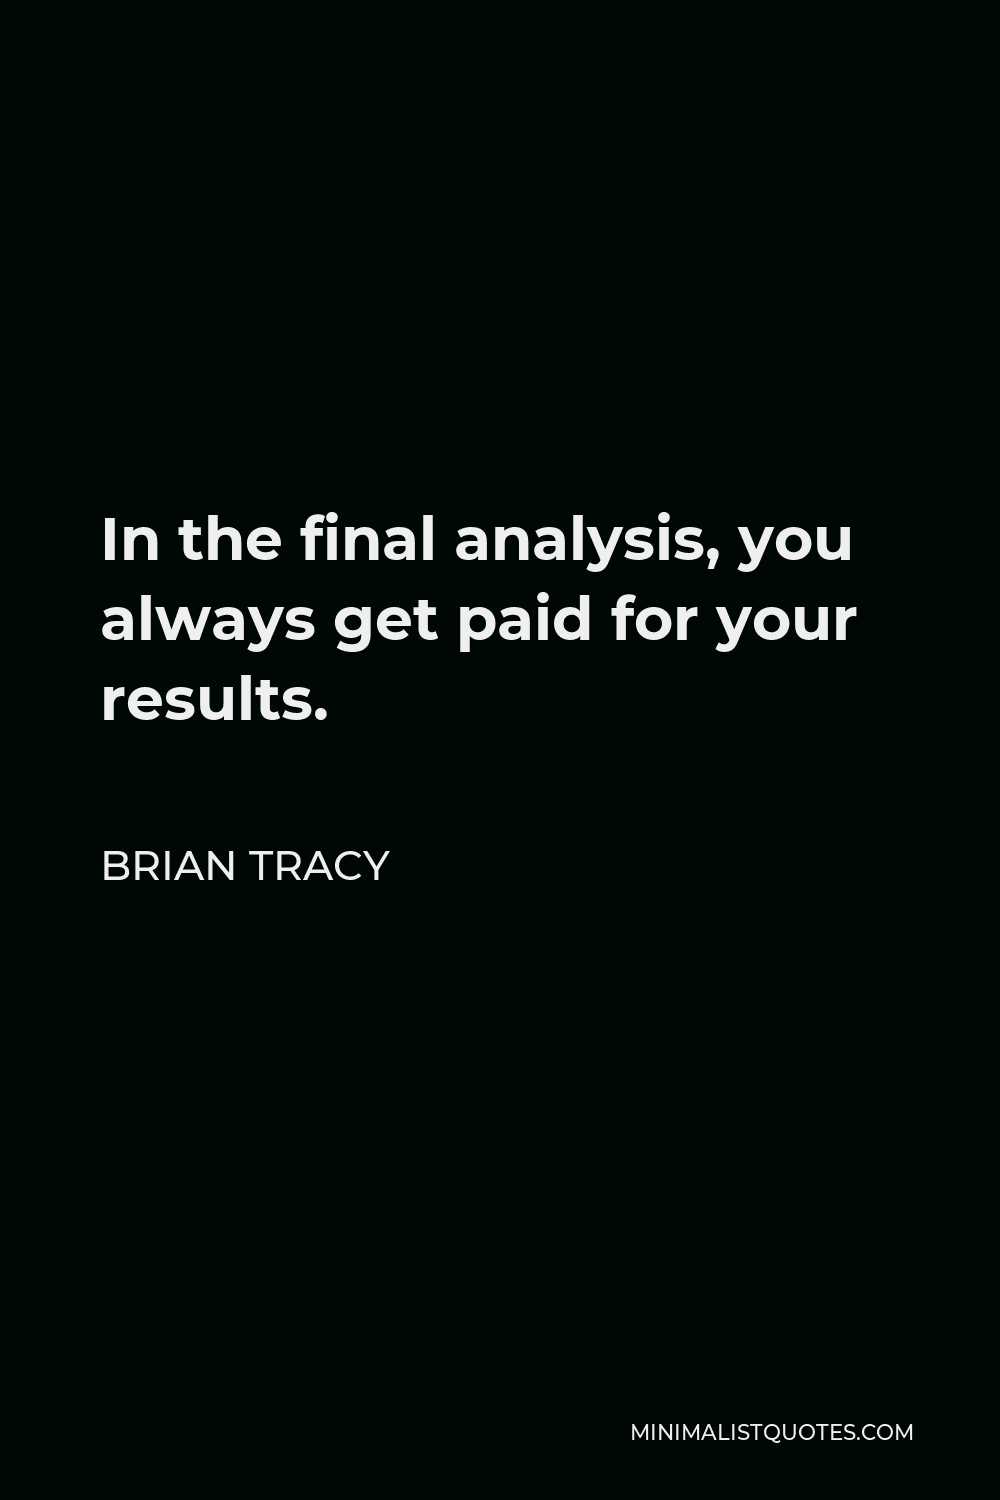 Brian Tracy Quote - In the final analysis, you always get paid for your results.